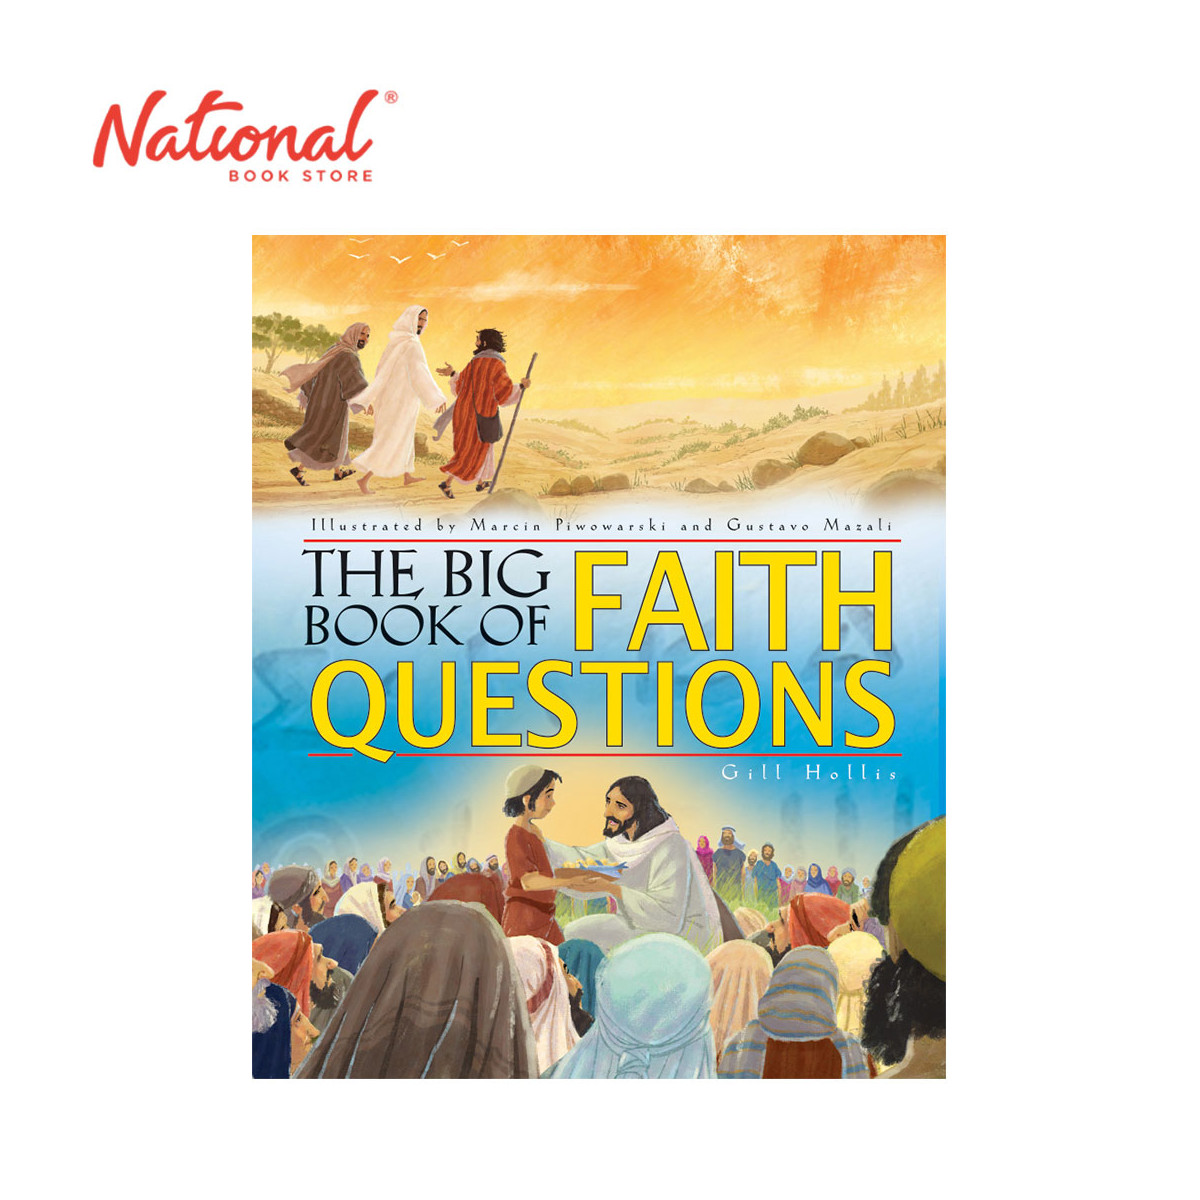 The Big Book of Faith Questions - Trade Paperback - Bible Stories for Kids